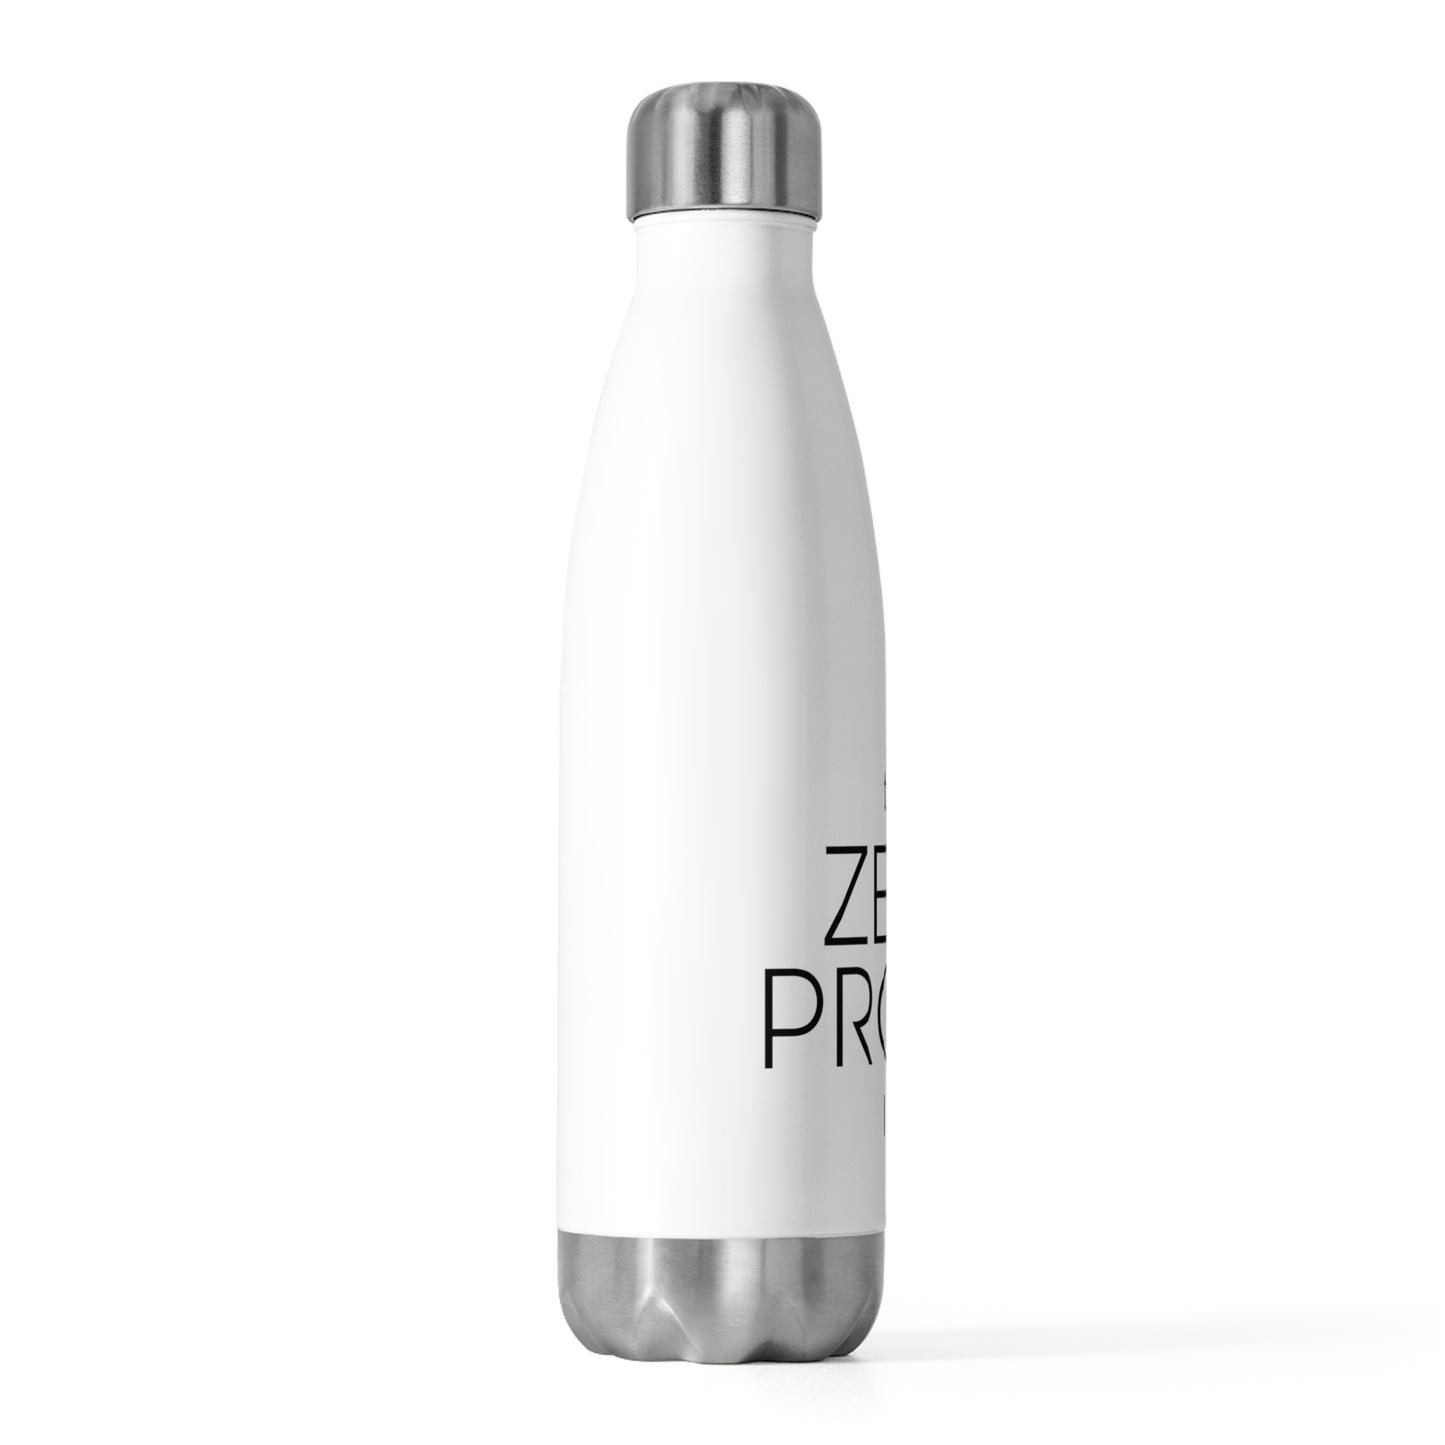 20oz Insulated Bottle